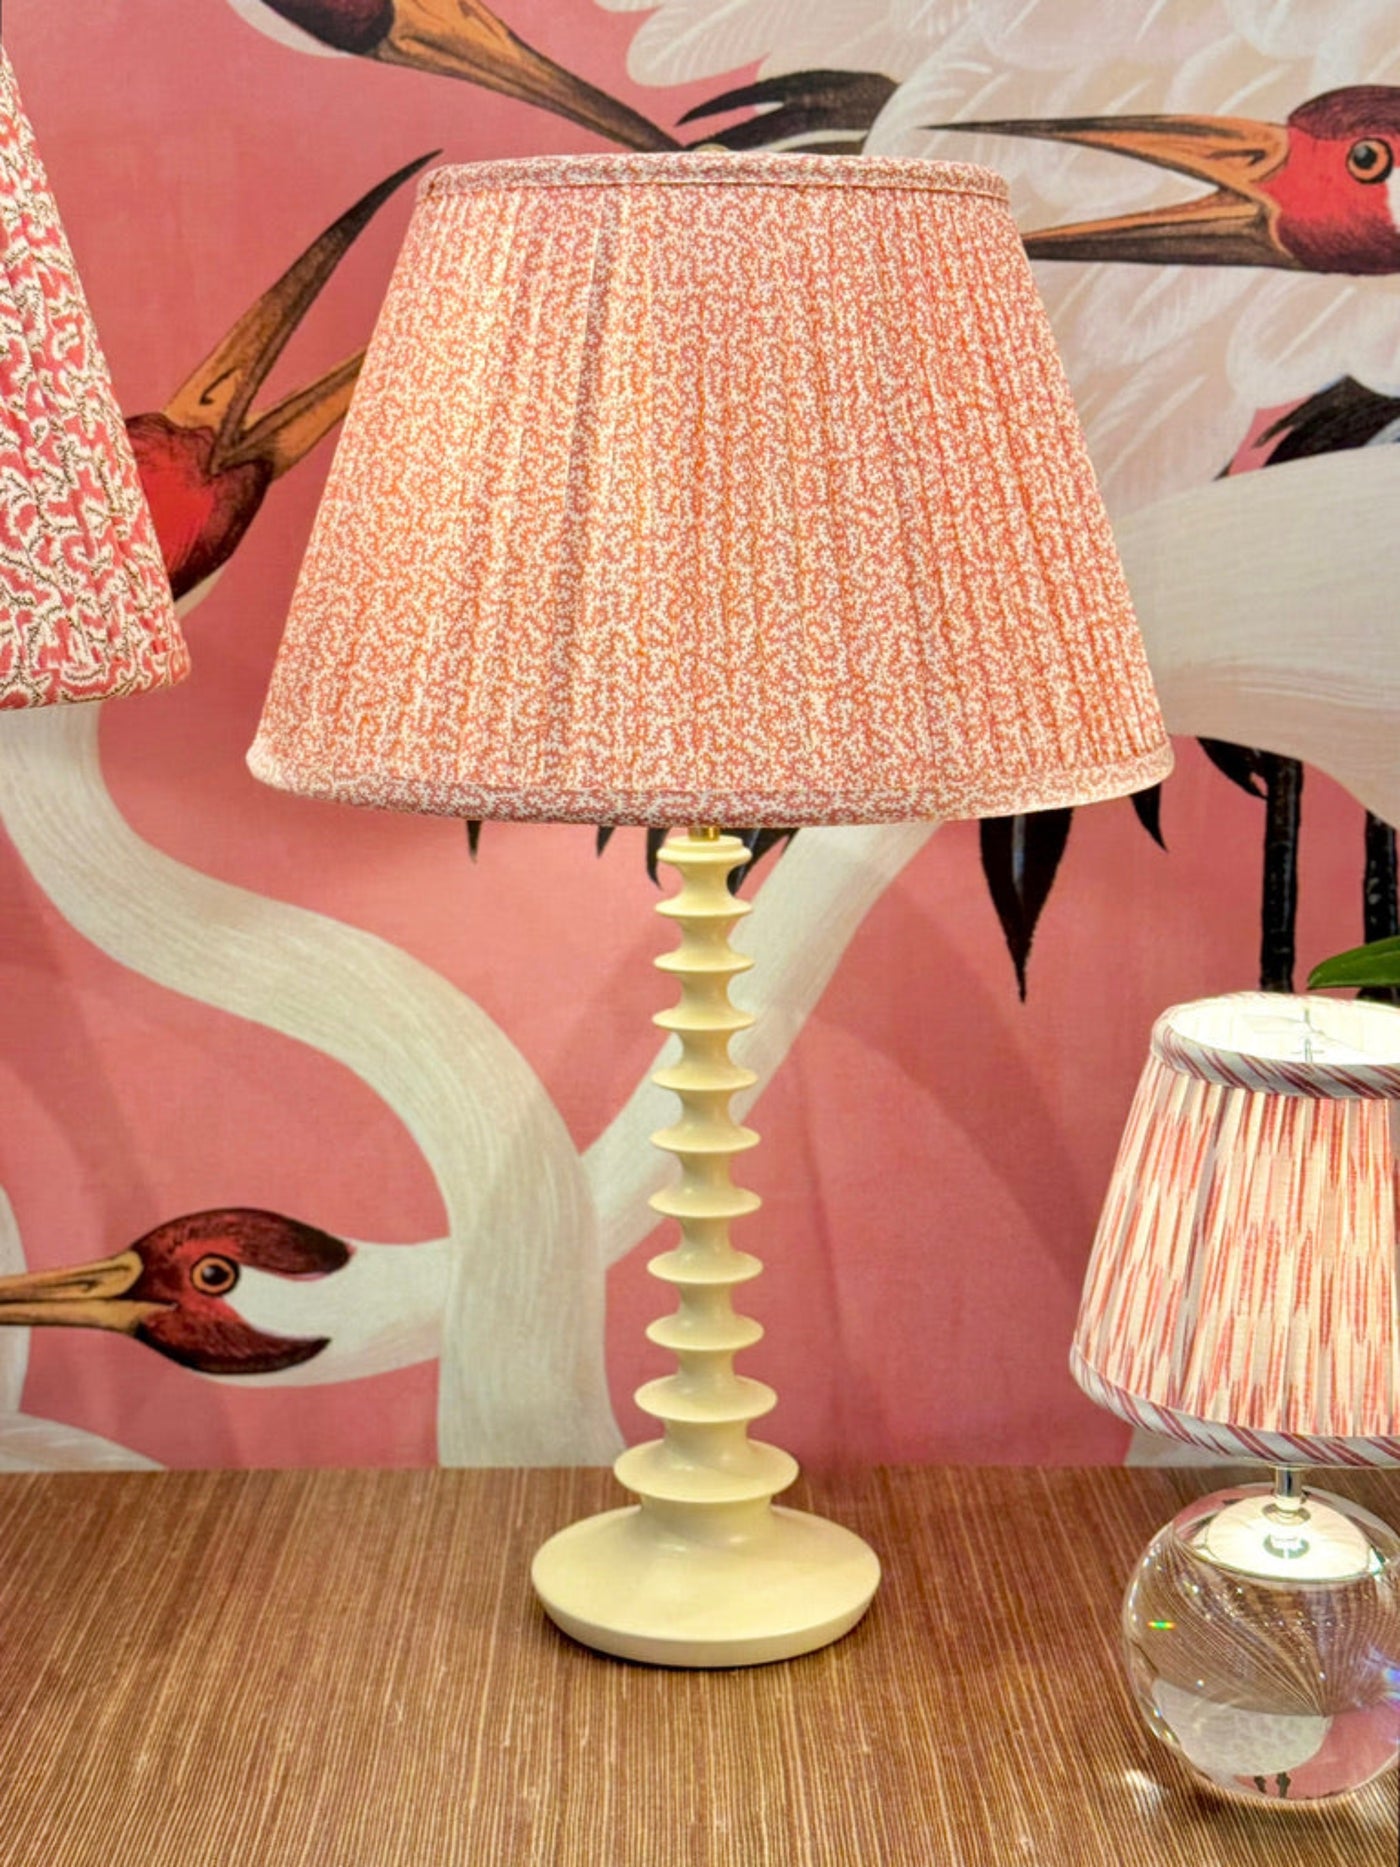 Ian Sanderson Lampshade and Penny Morrison Lampshade